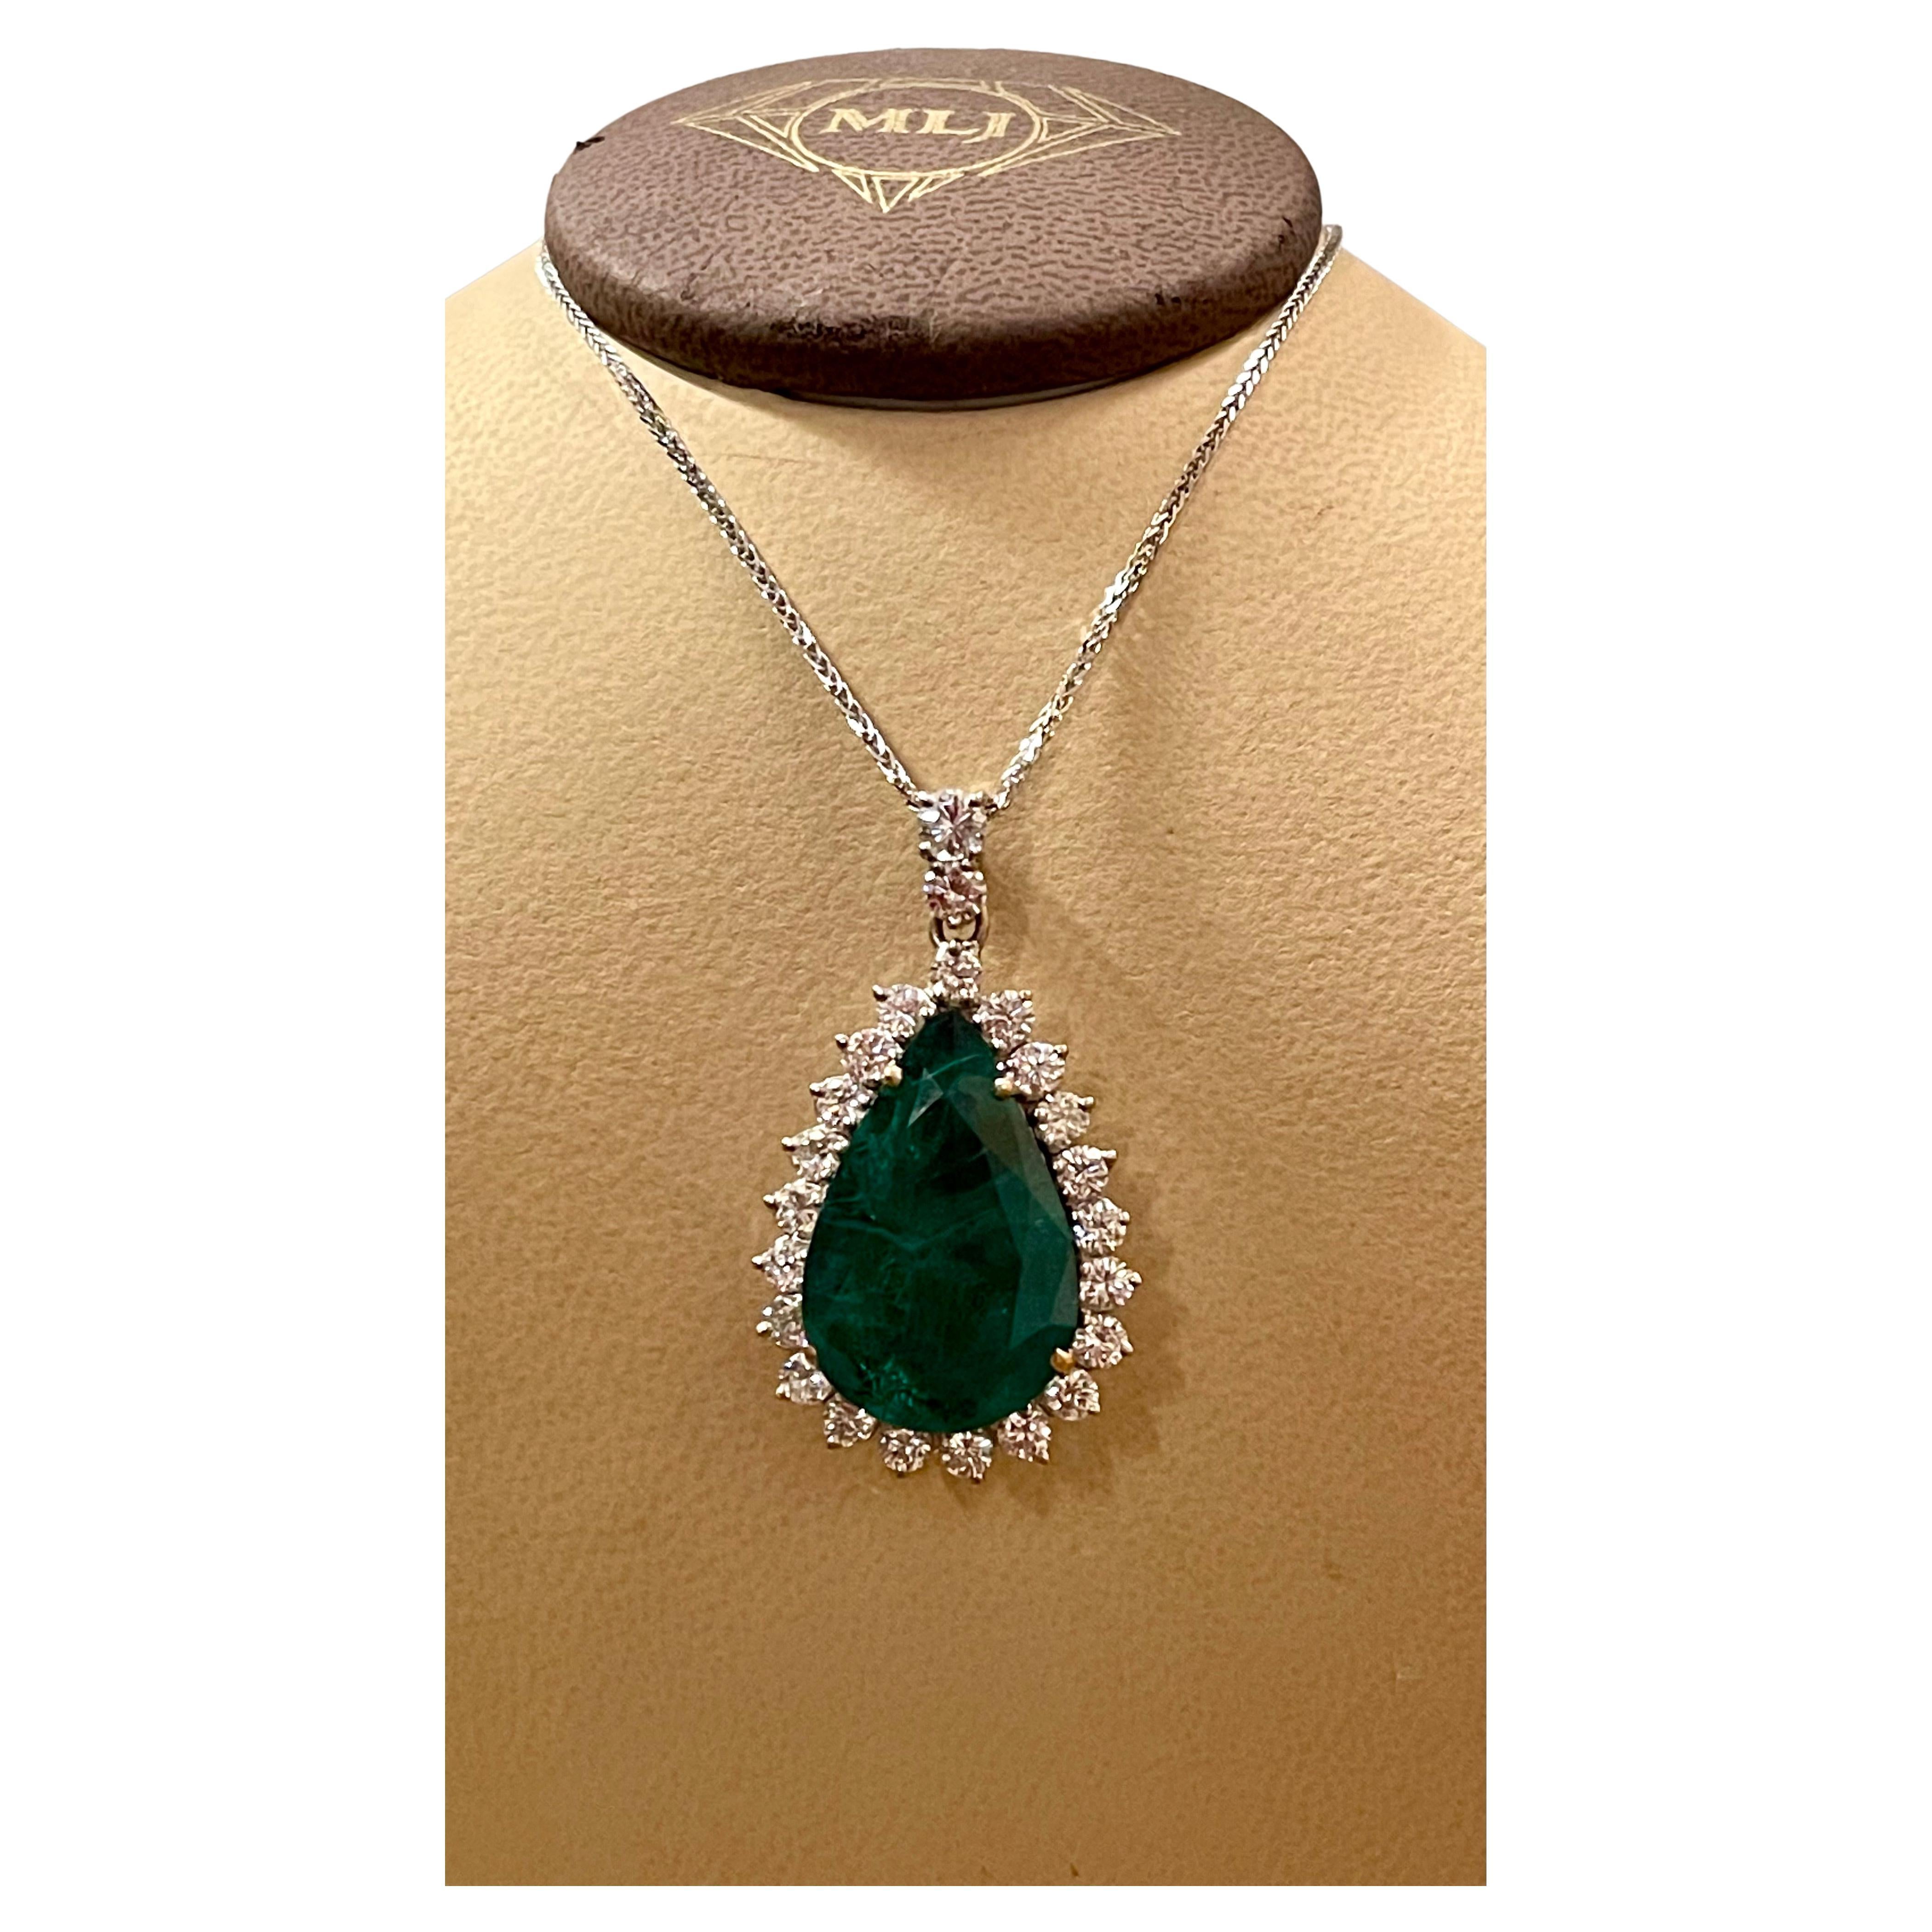 
15 Ct  Pear Hydro Emerald & 4 Ct Diamond Pendent/Necklace 18 Kt White Gold 
large, breathtaking, statement  Emerald and diamond necklace. This eye-catching pendant necklace features a 4.0 ct total weight of brilliant round  diamonds surrounding